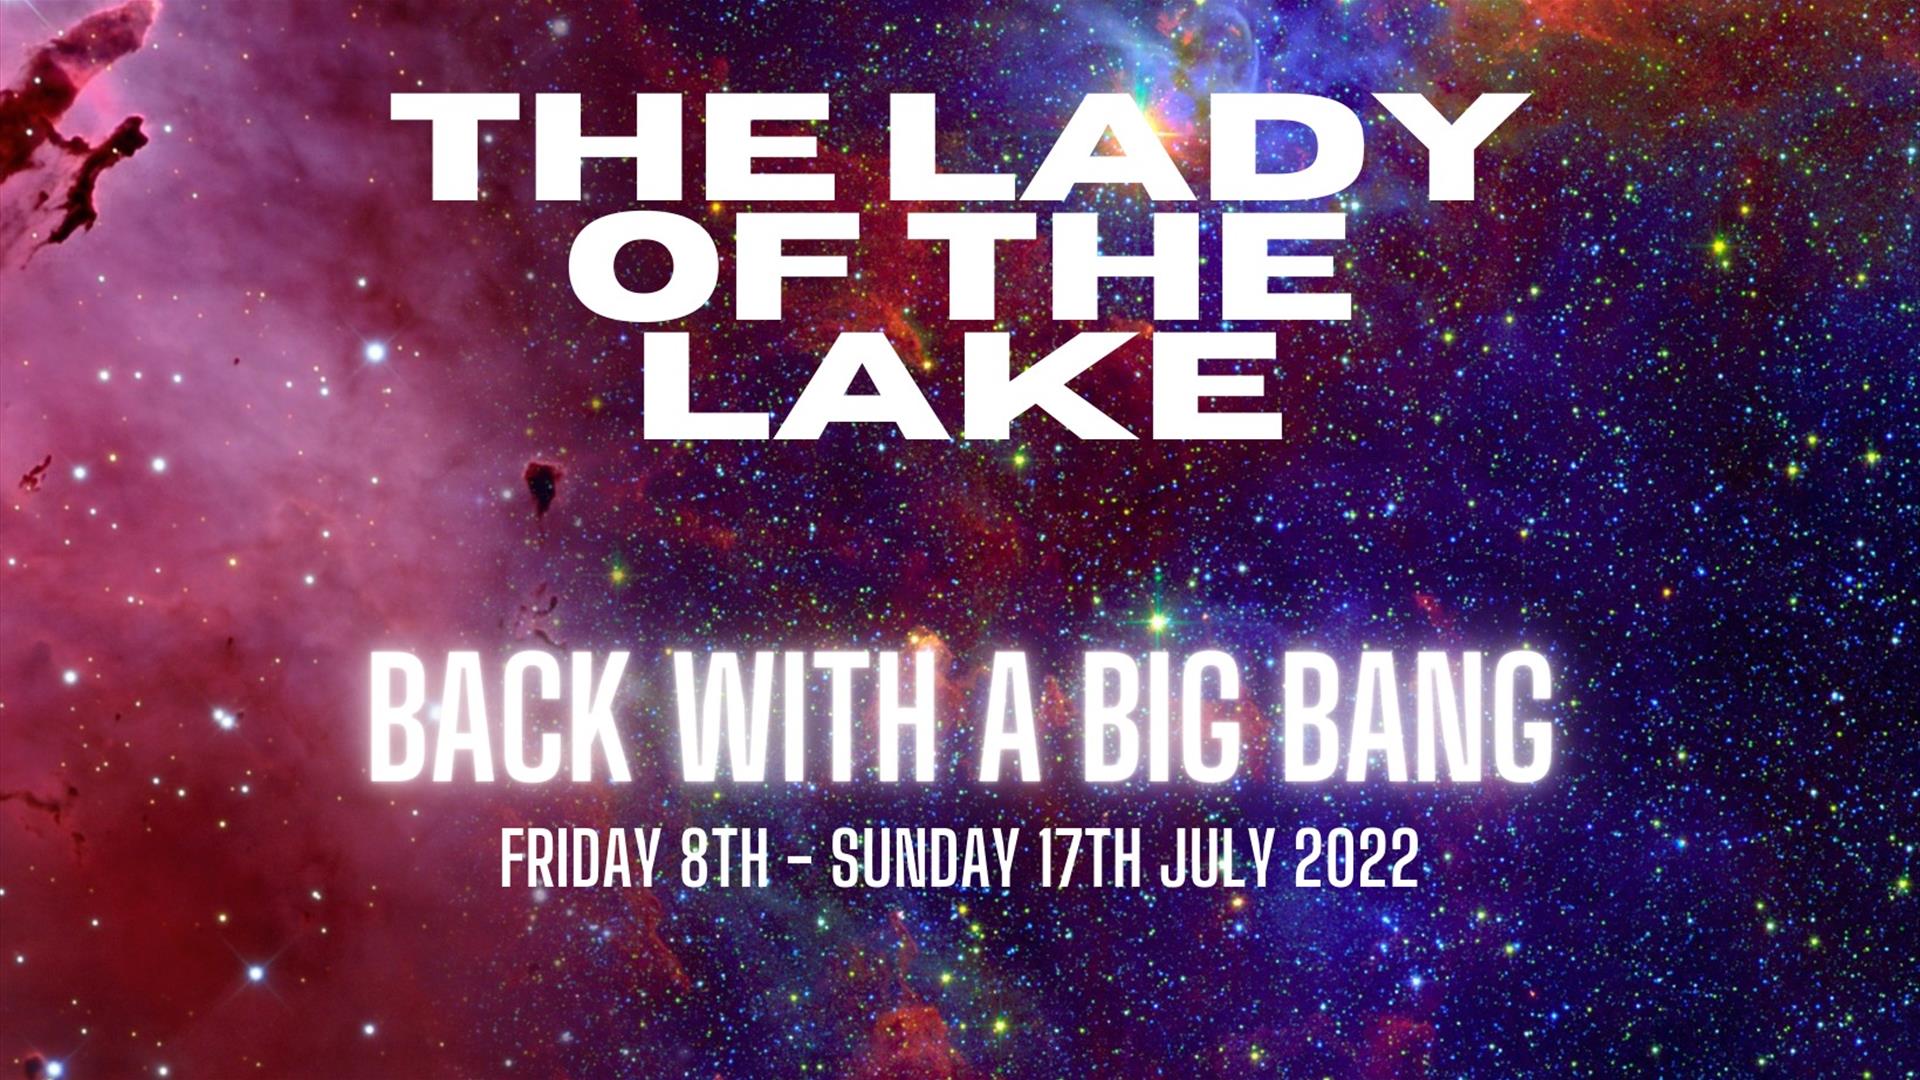 Lady of the lake festival Irvinestown